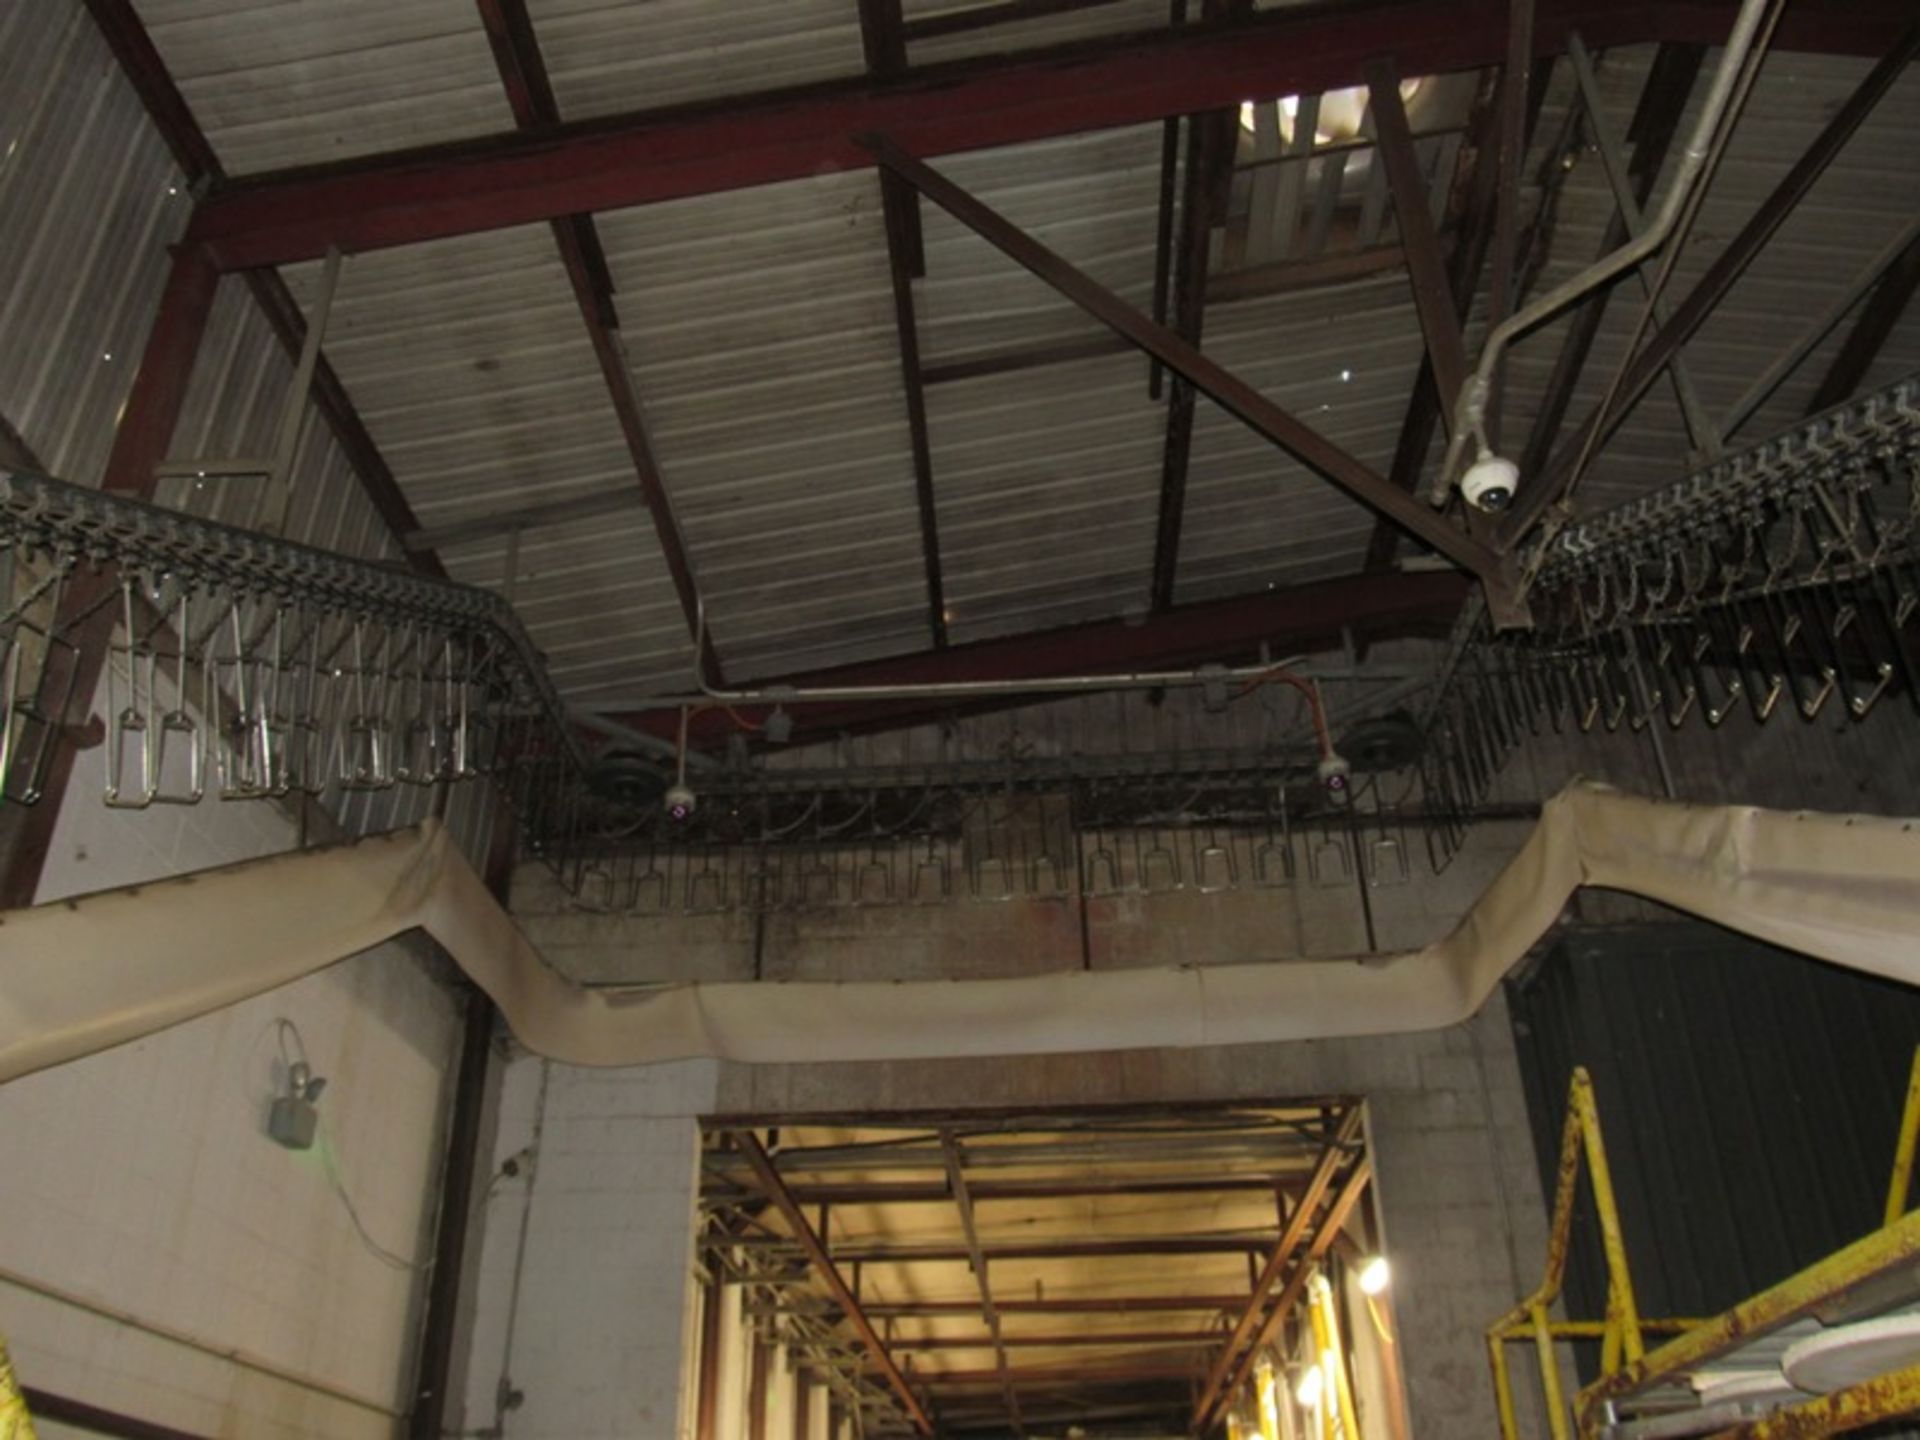 Lot Rail, Hangers and Chain approx. 800 stainless steel turkey Hangers on approx. | Rig Fee: $5200 - Image 8 of 15